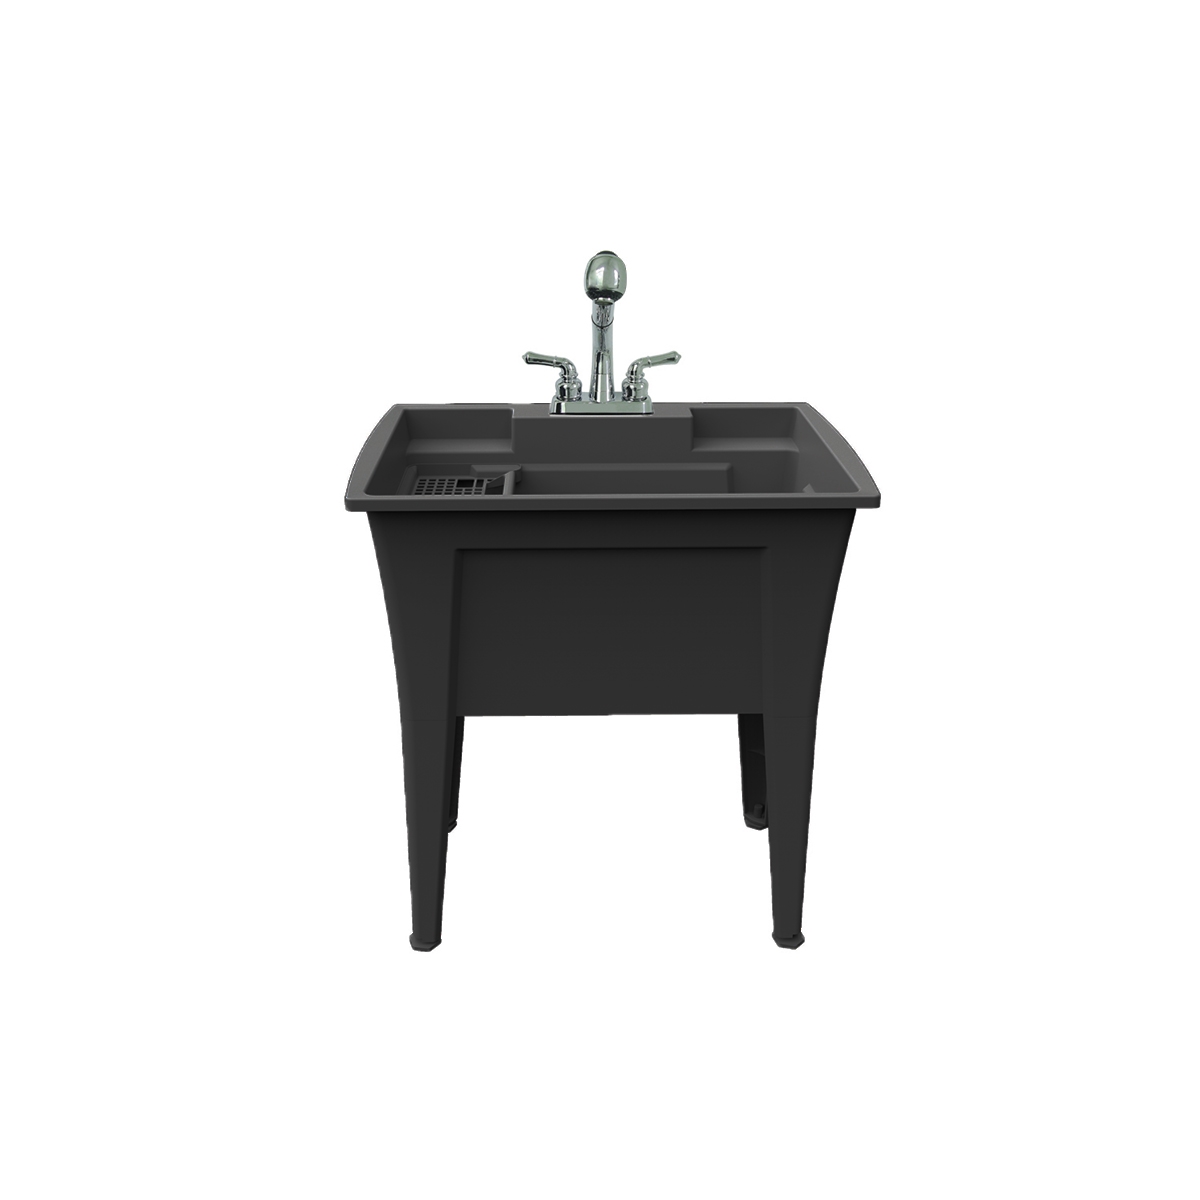 Picture of A&E Bath and Shower LT-32-01-BLK A&E Bath and Shower Jewel-BLK Laundry Tub in Black